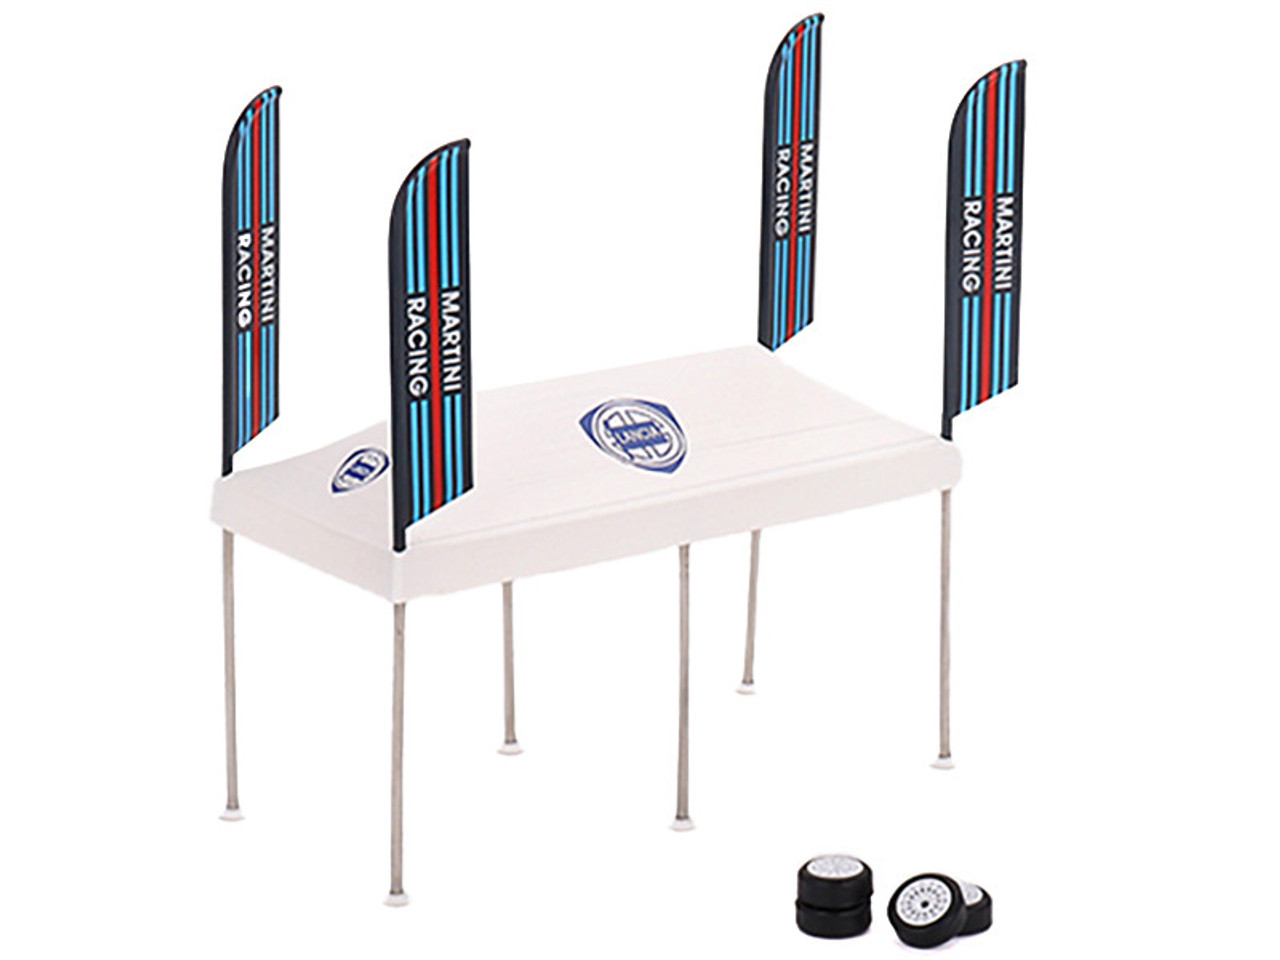 Paddock Service Tent Set with Extra Wheels "Martini Racing" for 1/64 scale models by True Scale Miniatures